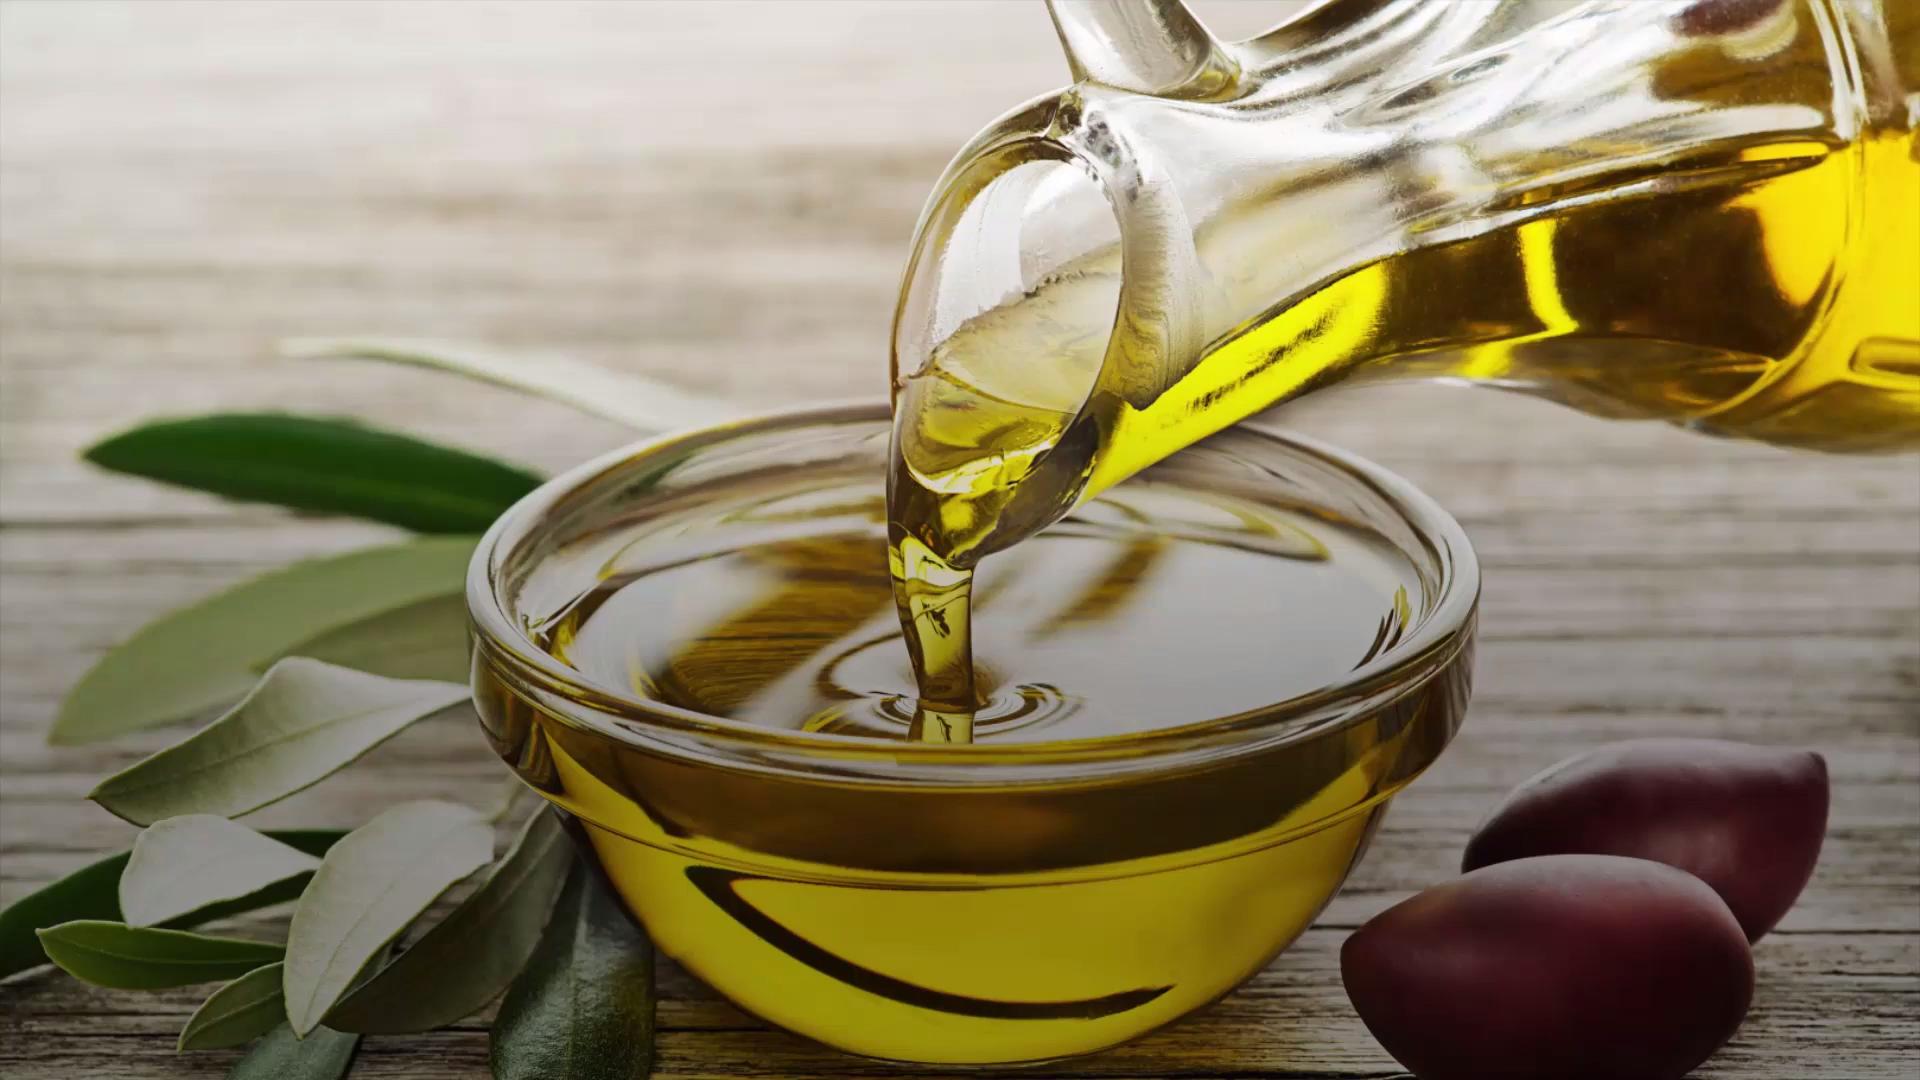 Big Mistakes You're Probably Making With Olive Oil